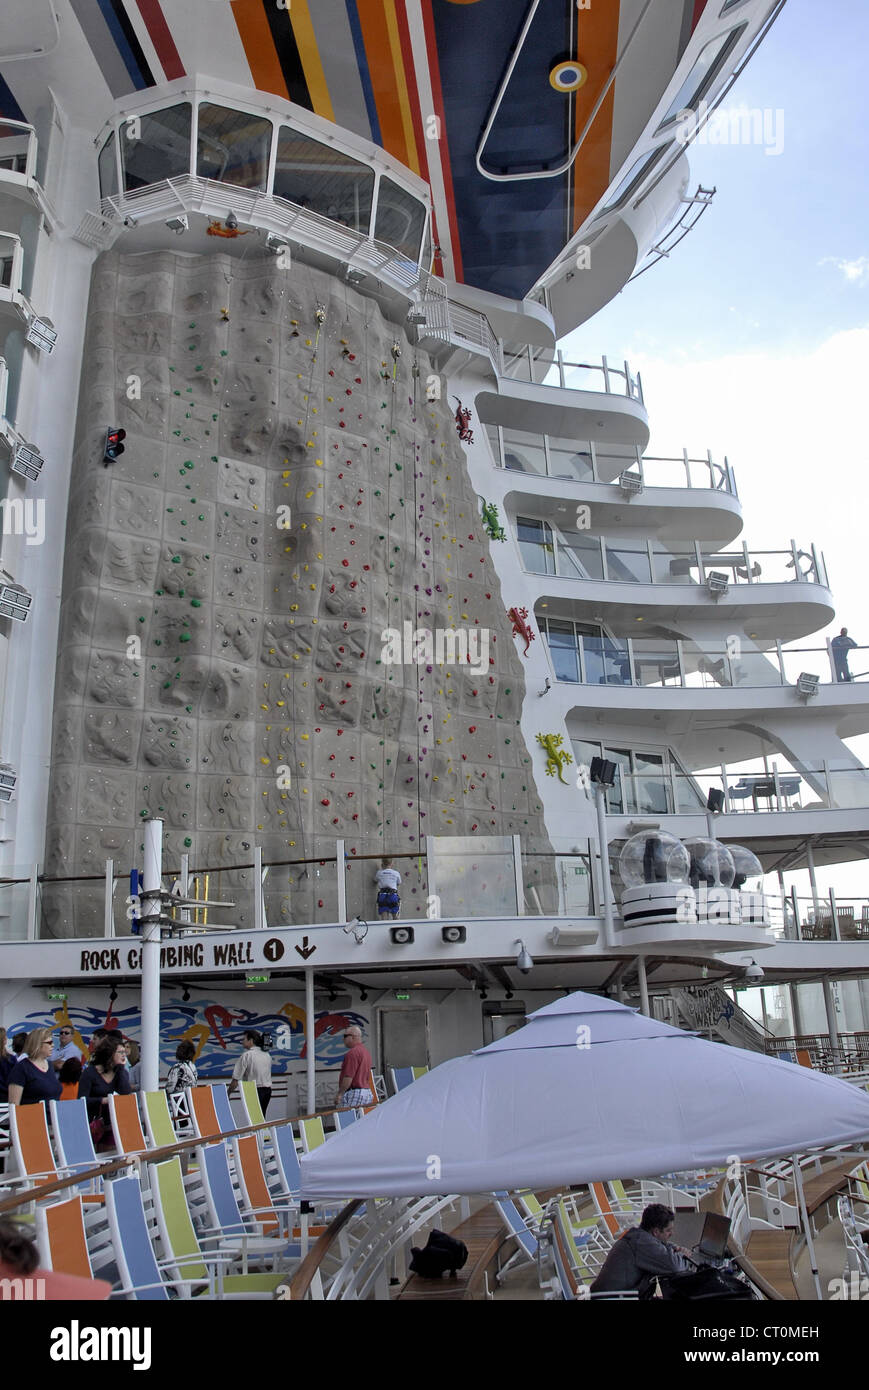 Climbing wall on the Royal Caribbean International's Oasis of the Seas largest passenger ship Stock Photo